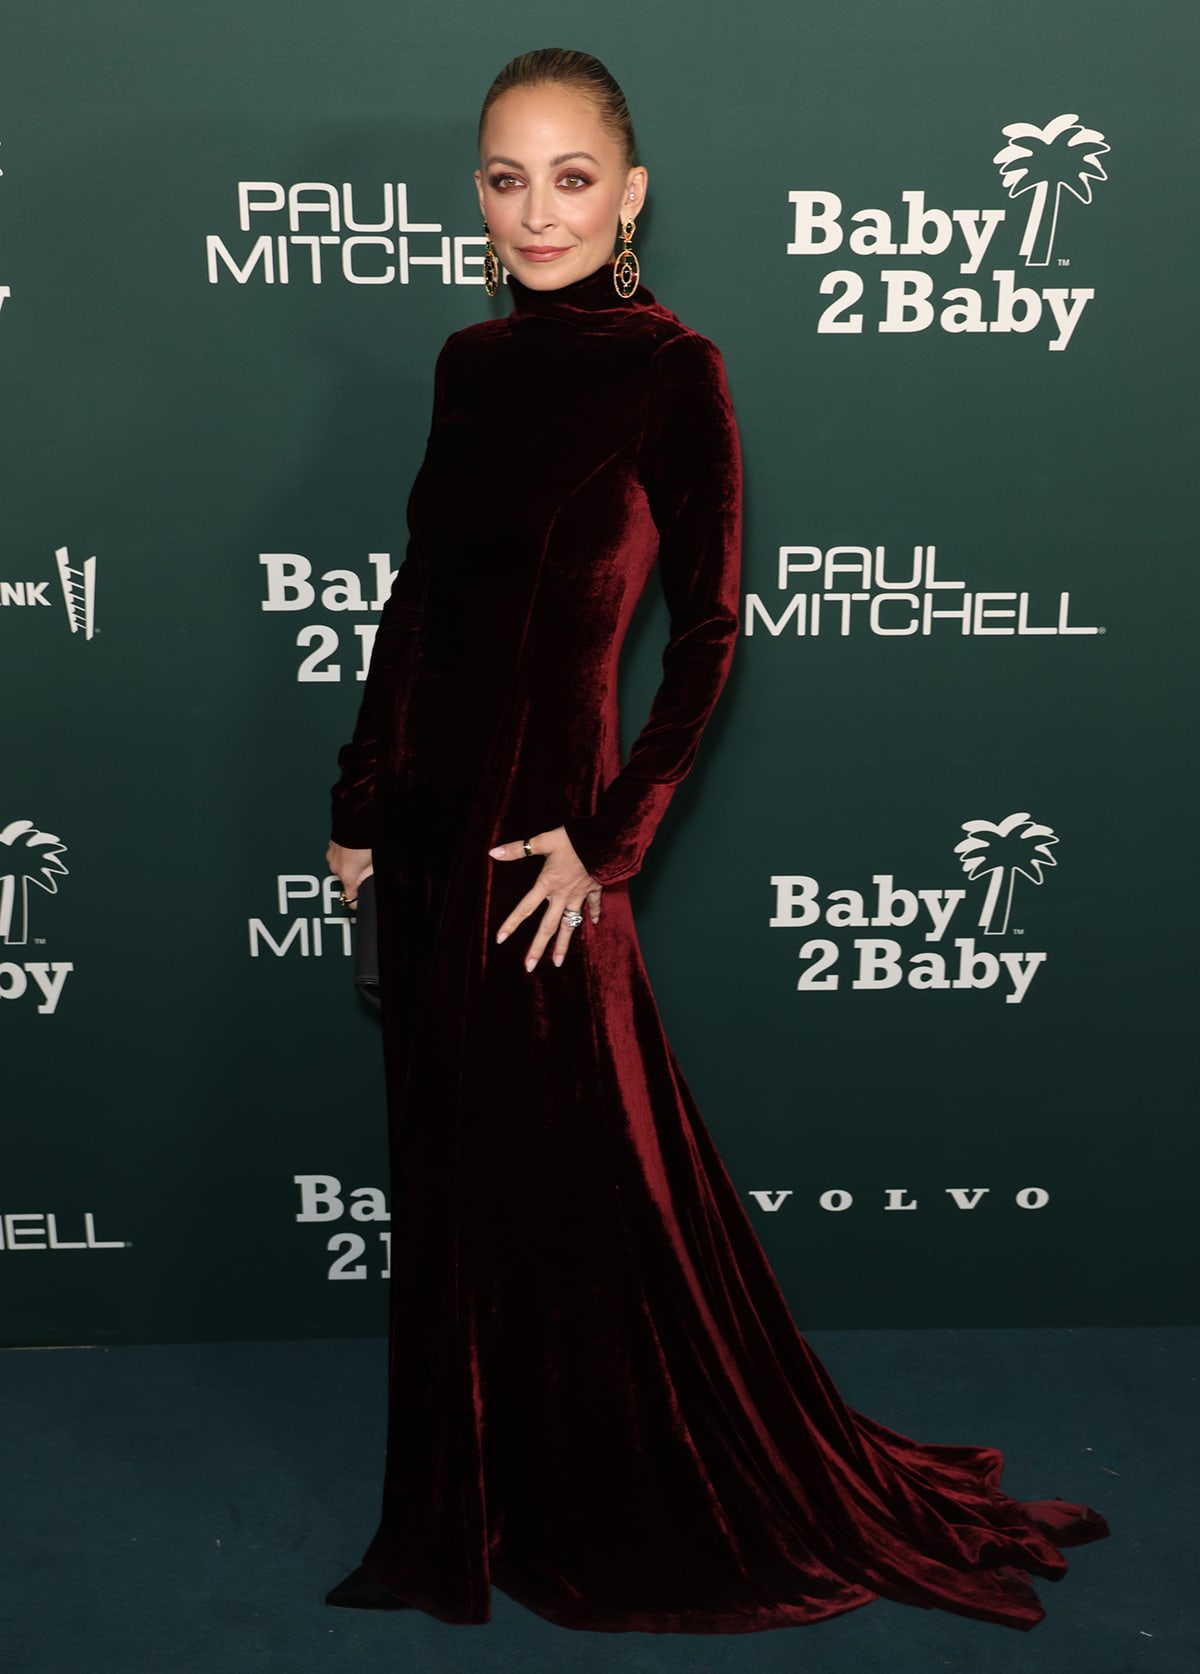 Nicole Richie embraces her signature gothic style in a red velour Alberta Ferretti gown with a high neck, long sleeves, and a floor-sweeping train